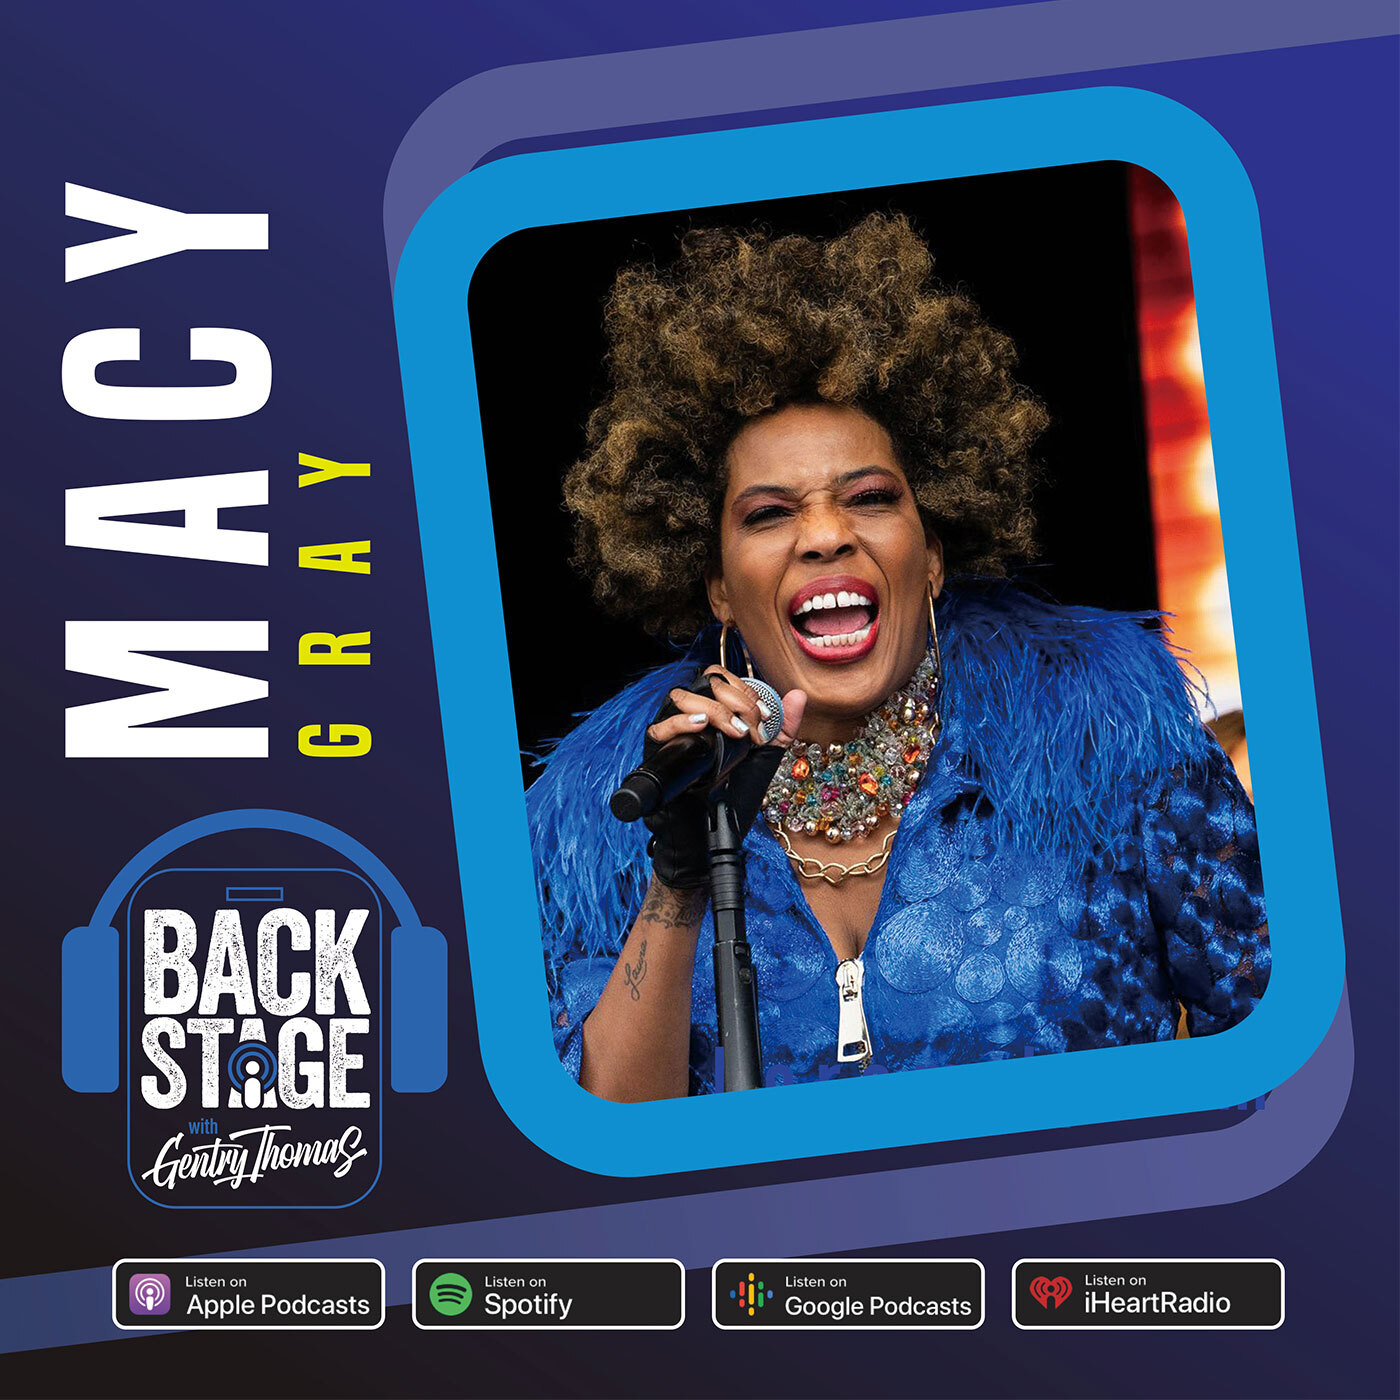 Macy Gray talks music, movies and clears old rumors Backstage with Gentry Thomas